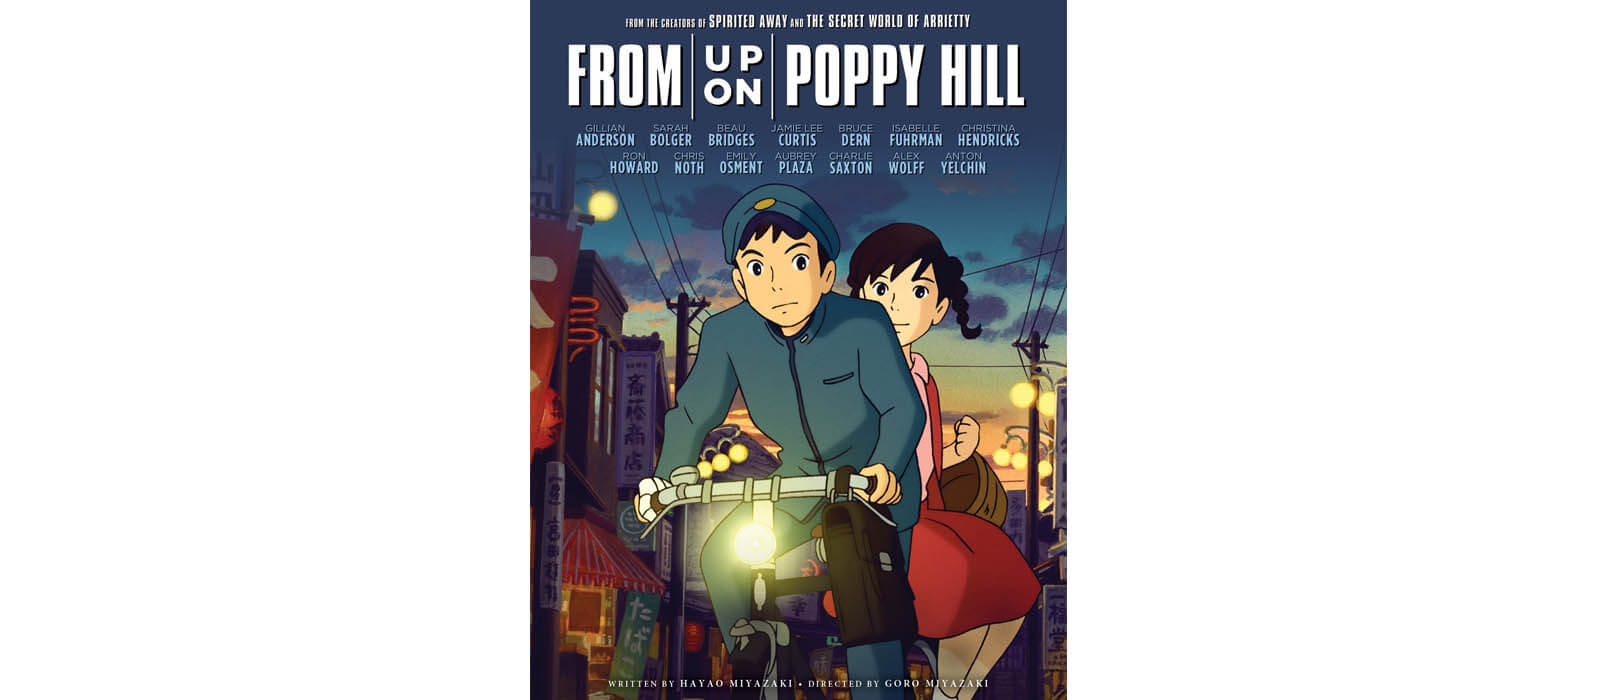 From Up On The Poppy Hill